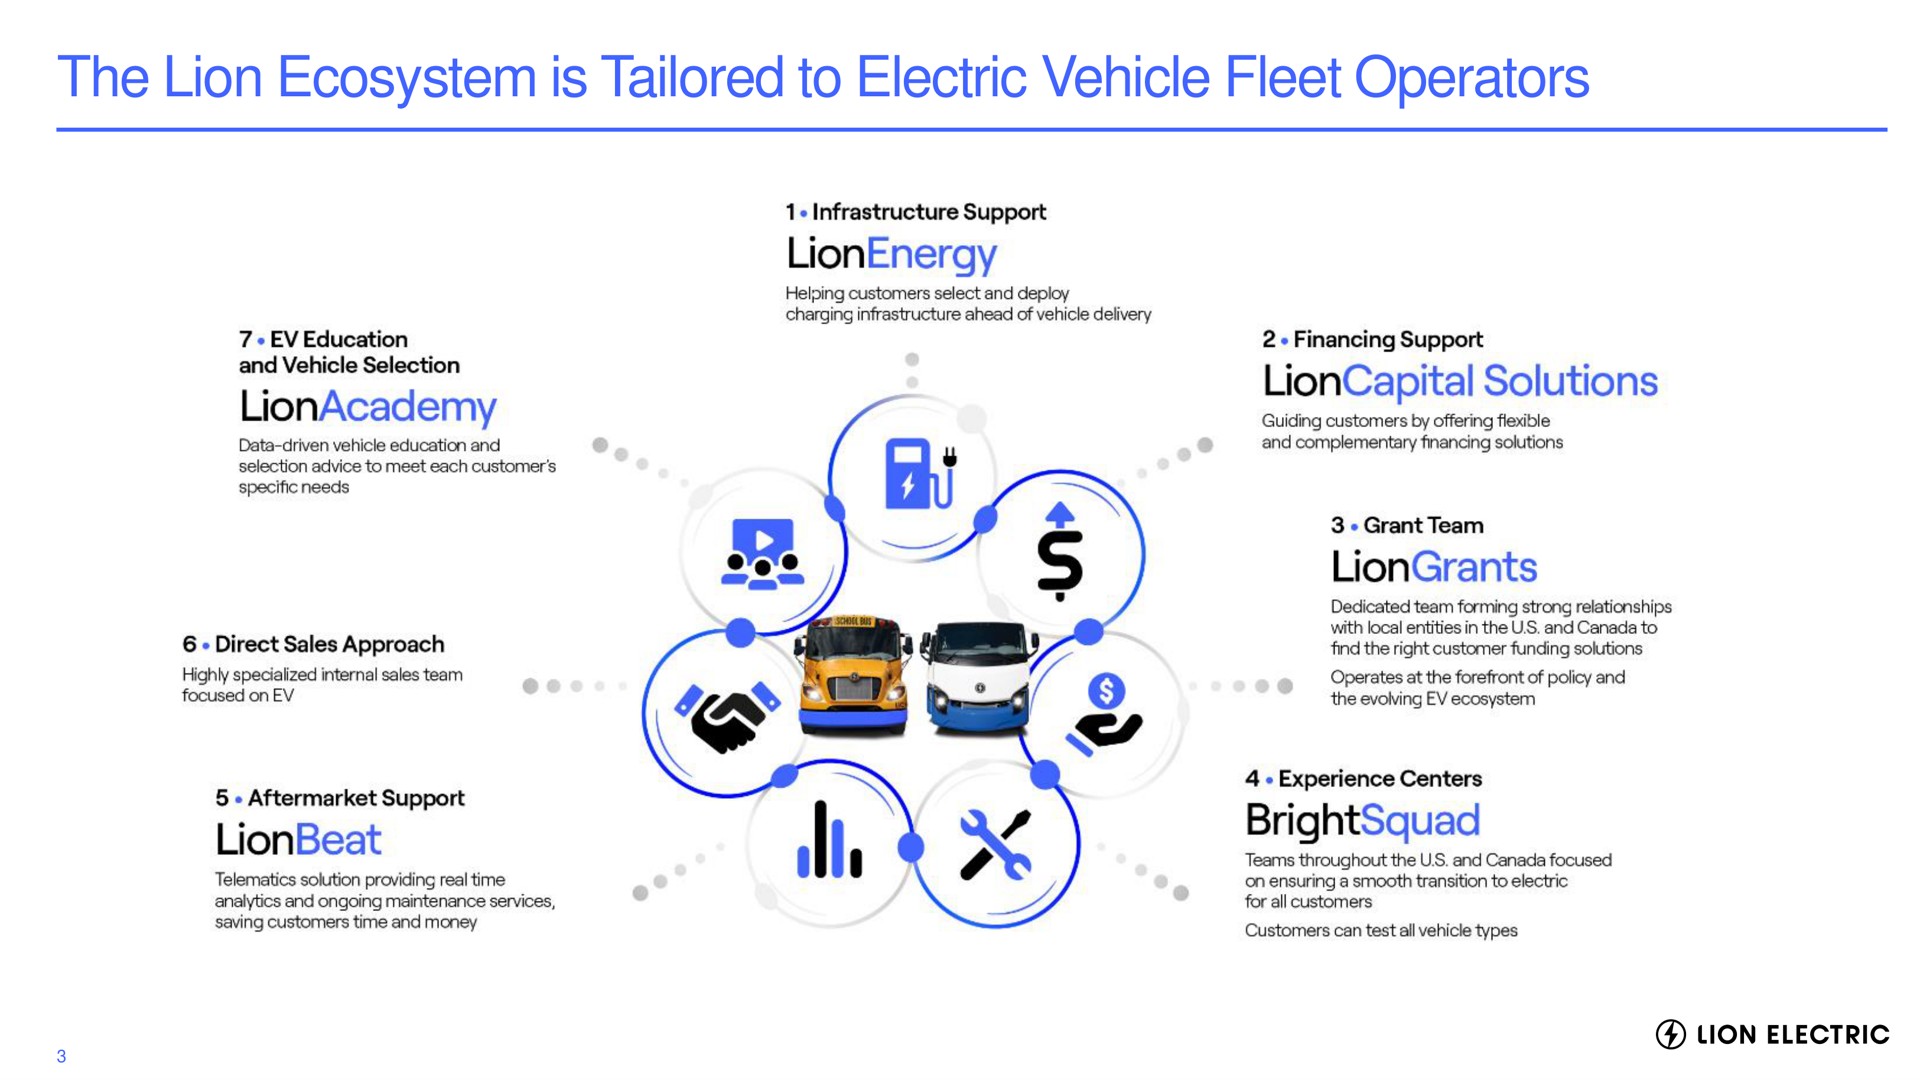 the lion ecosystem is tailored to electric vehicle fleet operators | Lion Electric